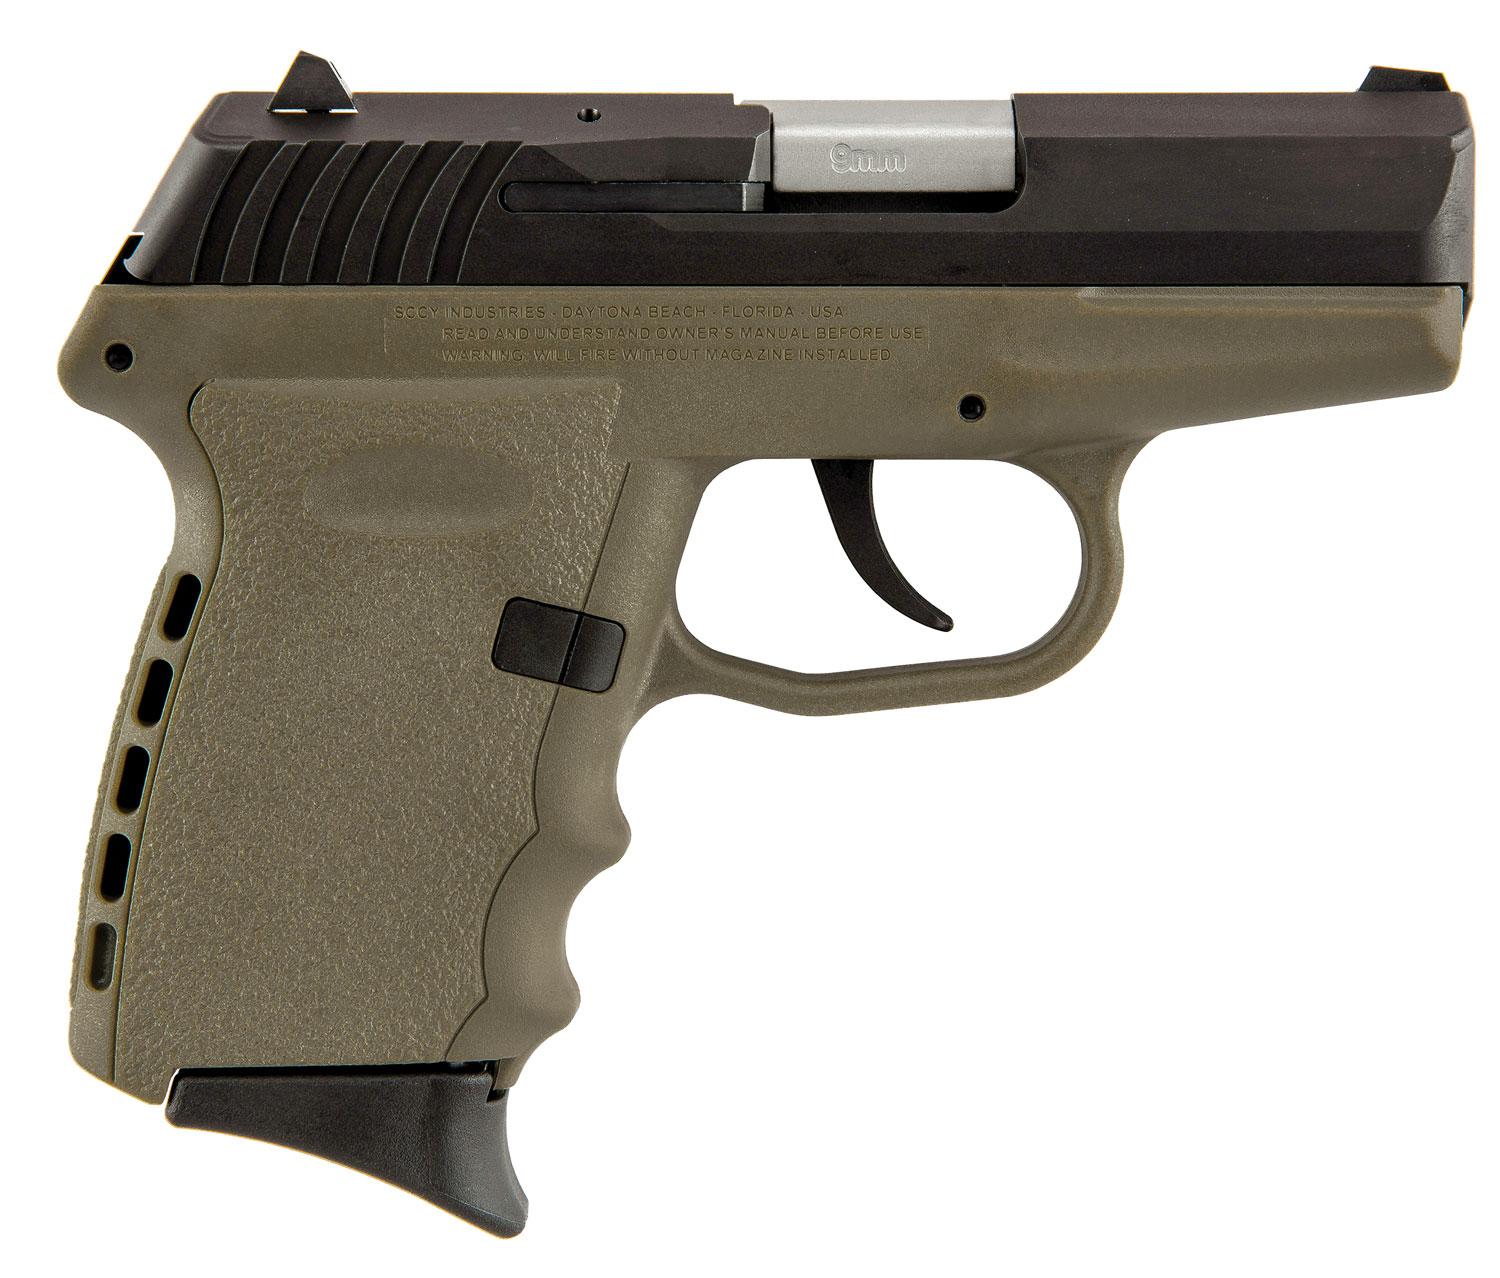  Sccy Cpx- 2 9mm 10rd 3.1 Blk/Fde